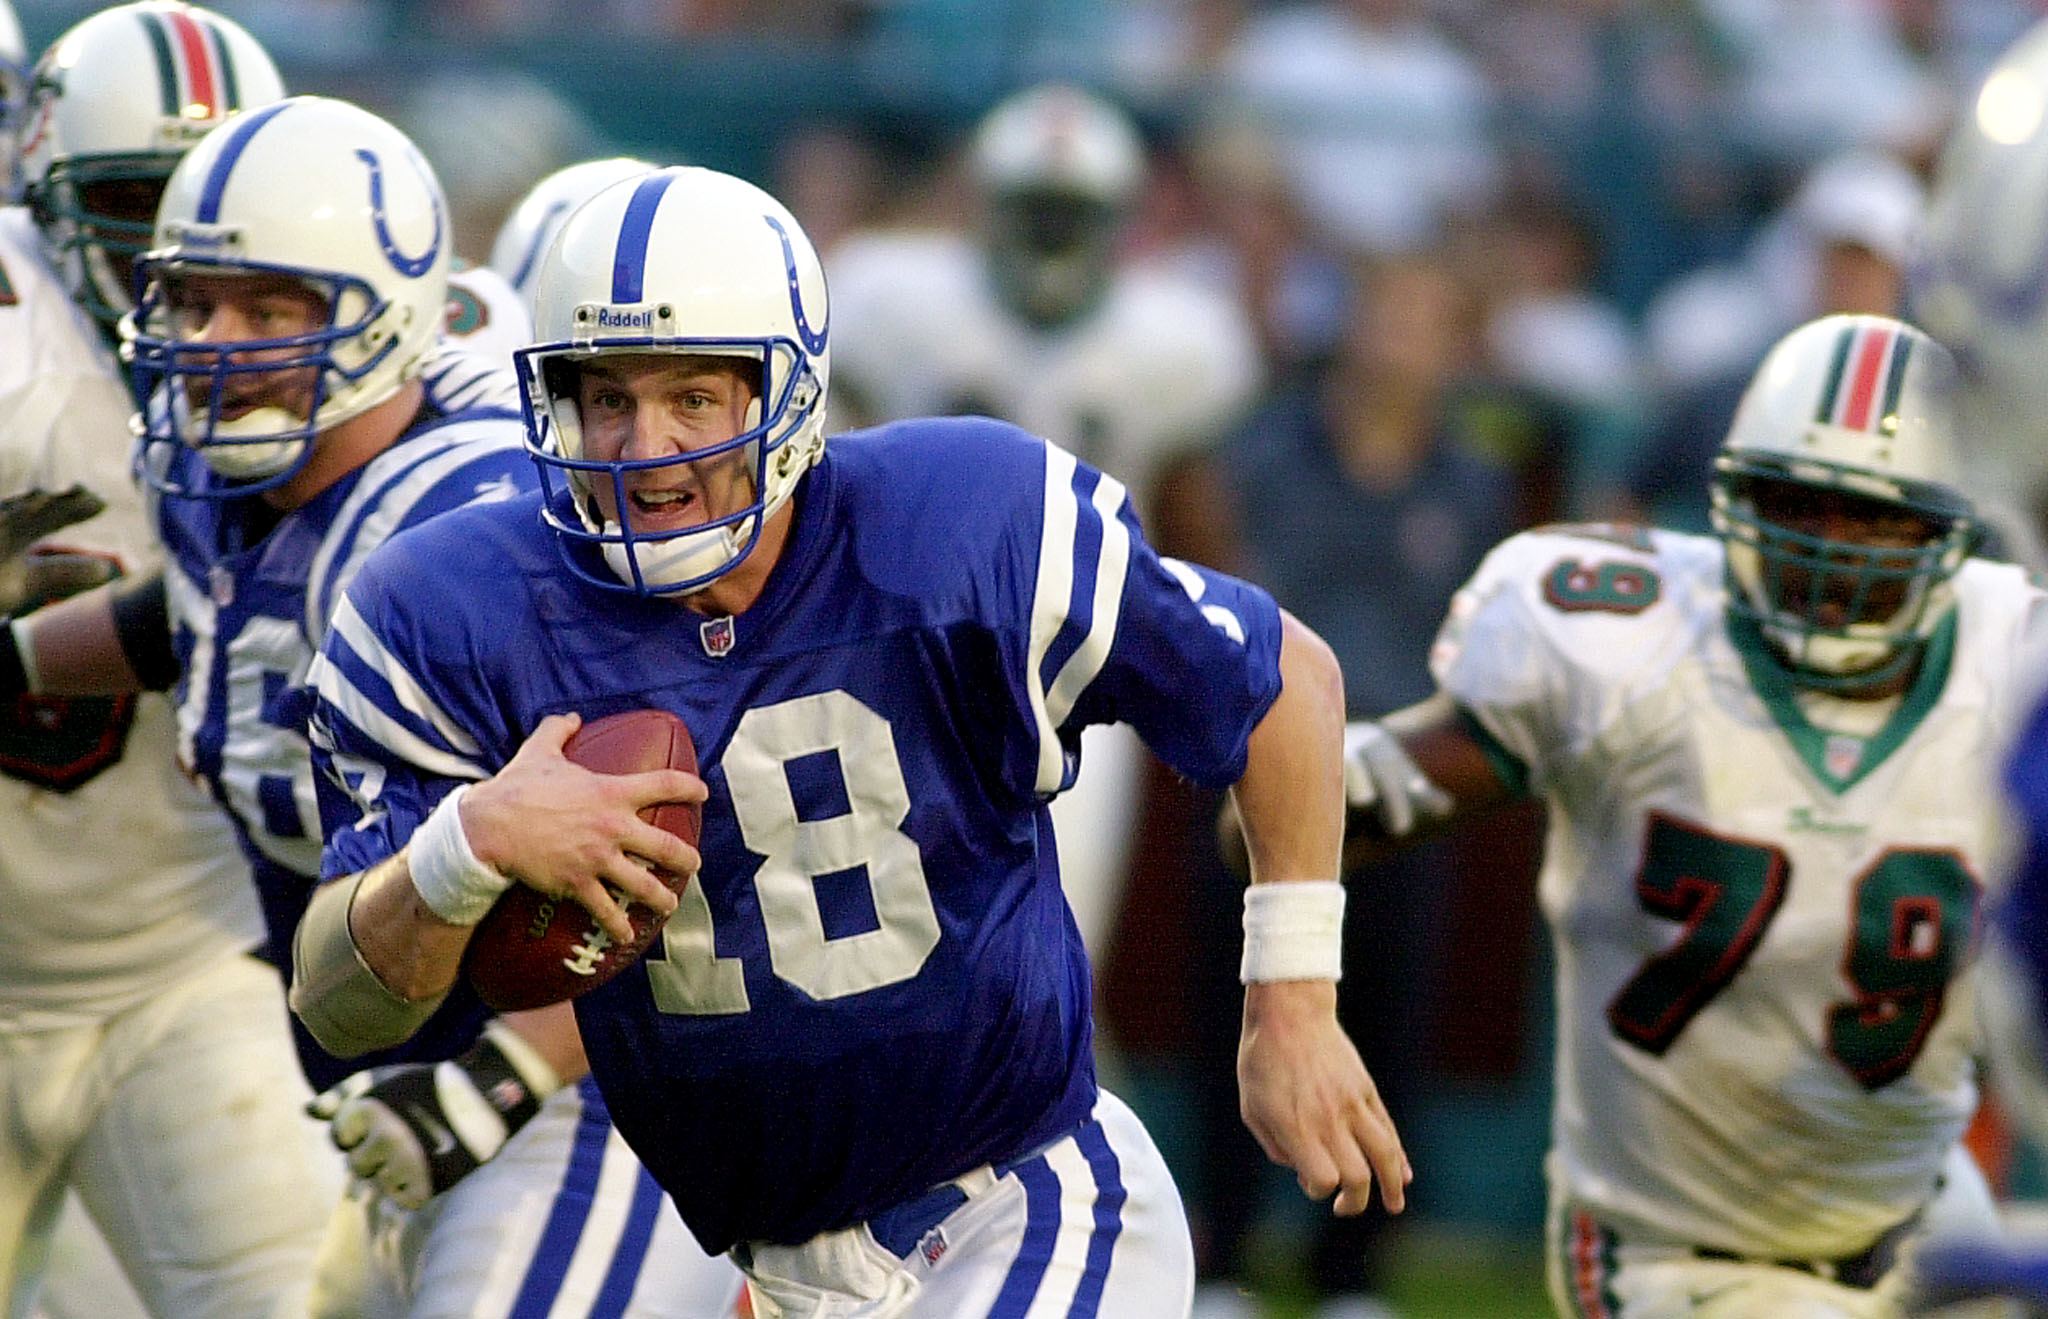 Peyton Manning runs with the football during a Colts game